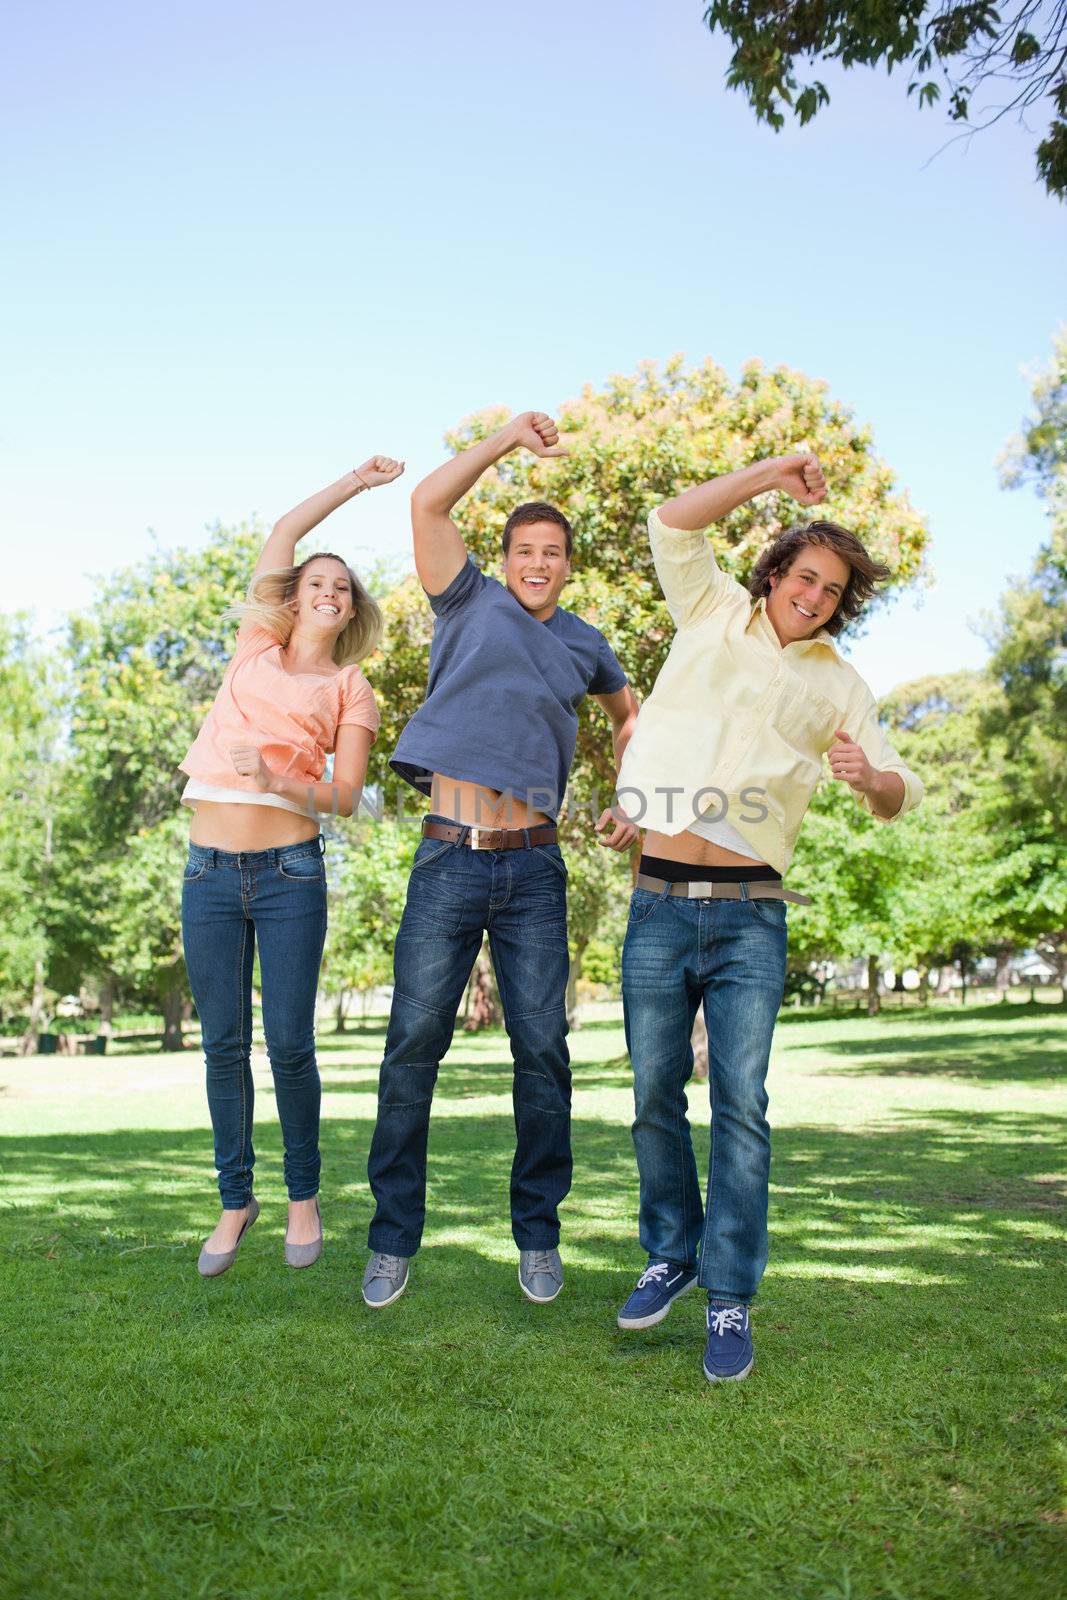 Three students jumping while raising an arm by Wavebreakmedia